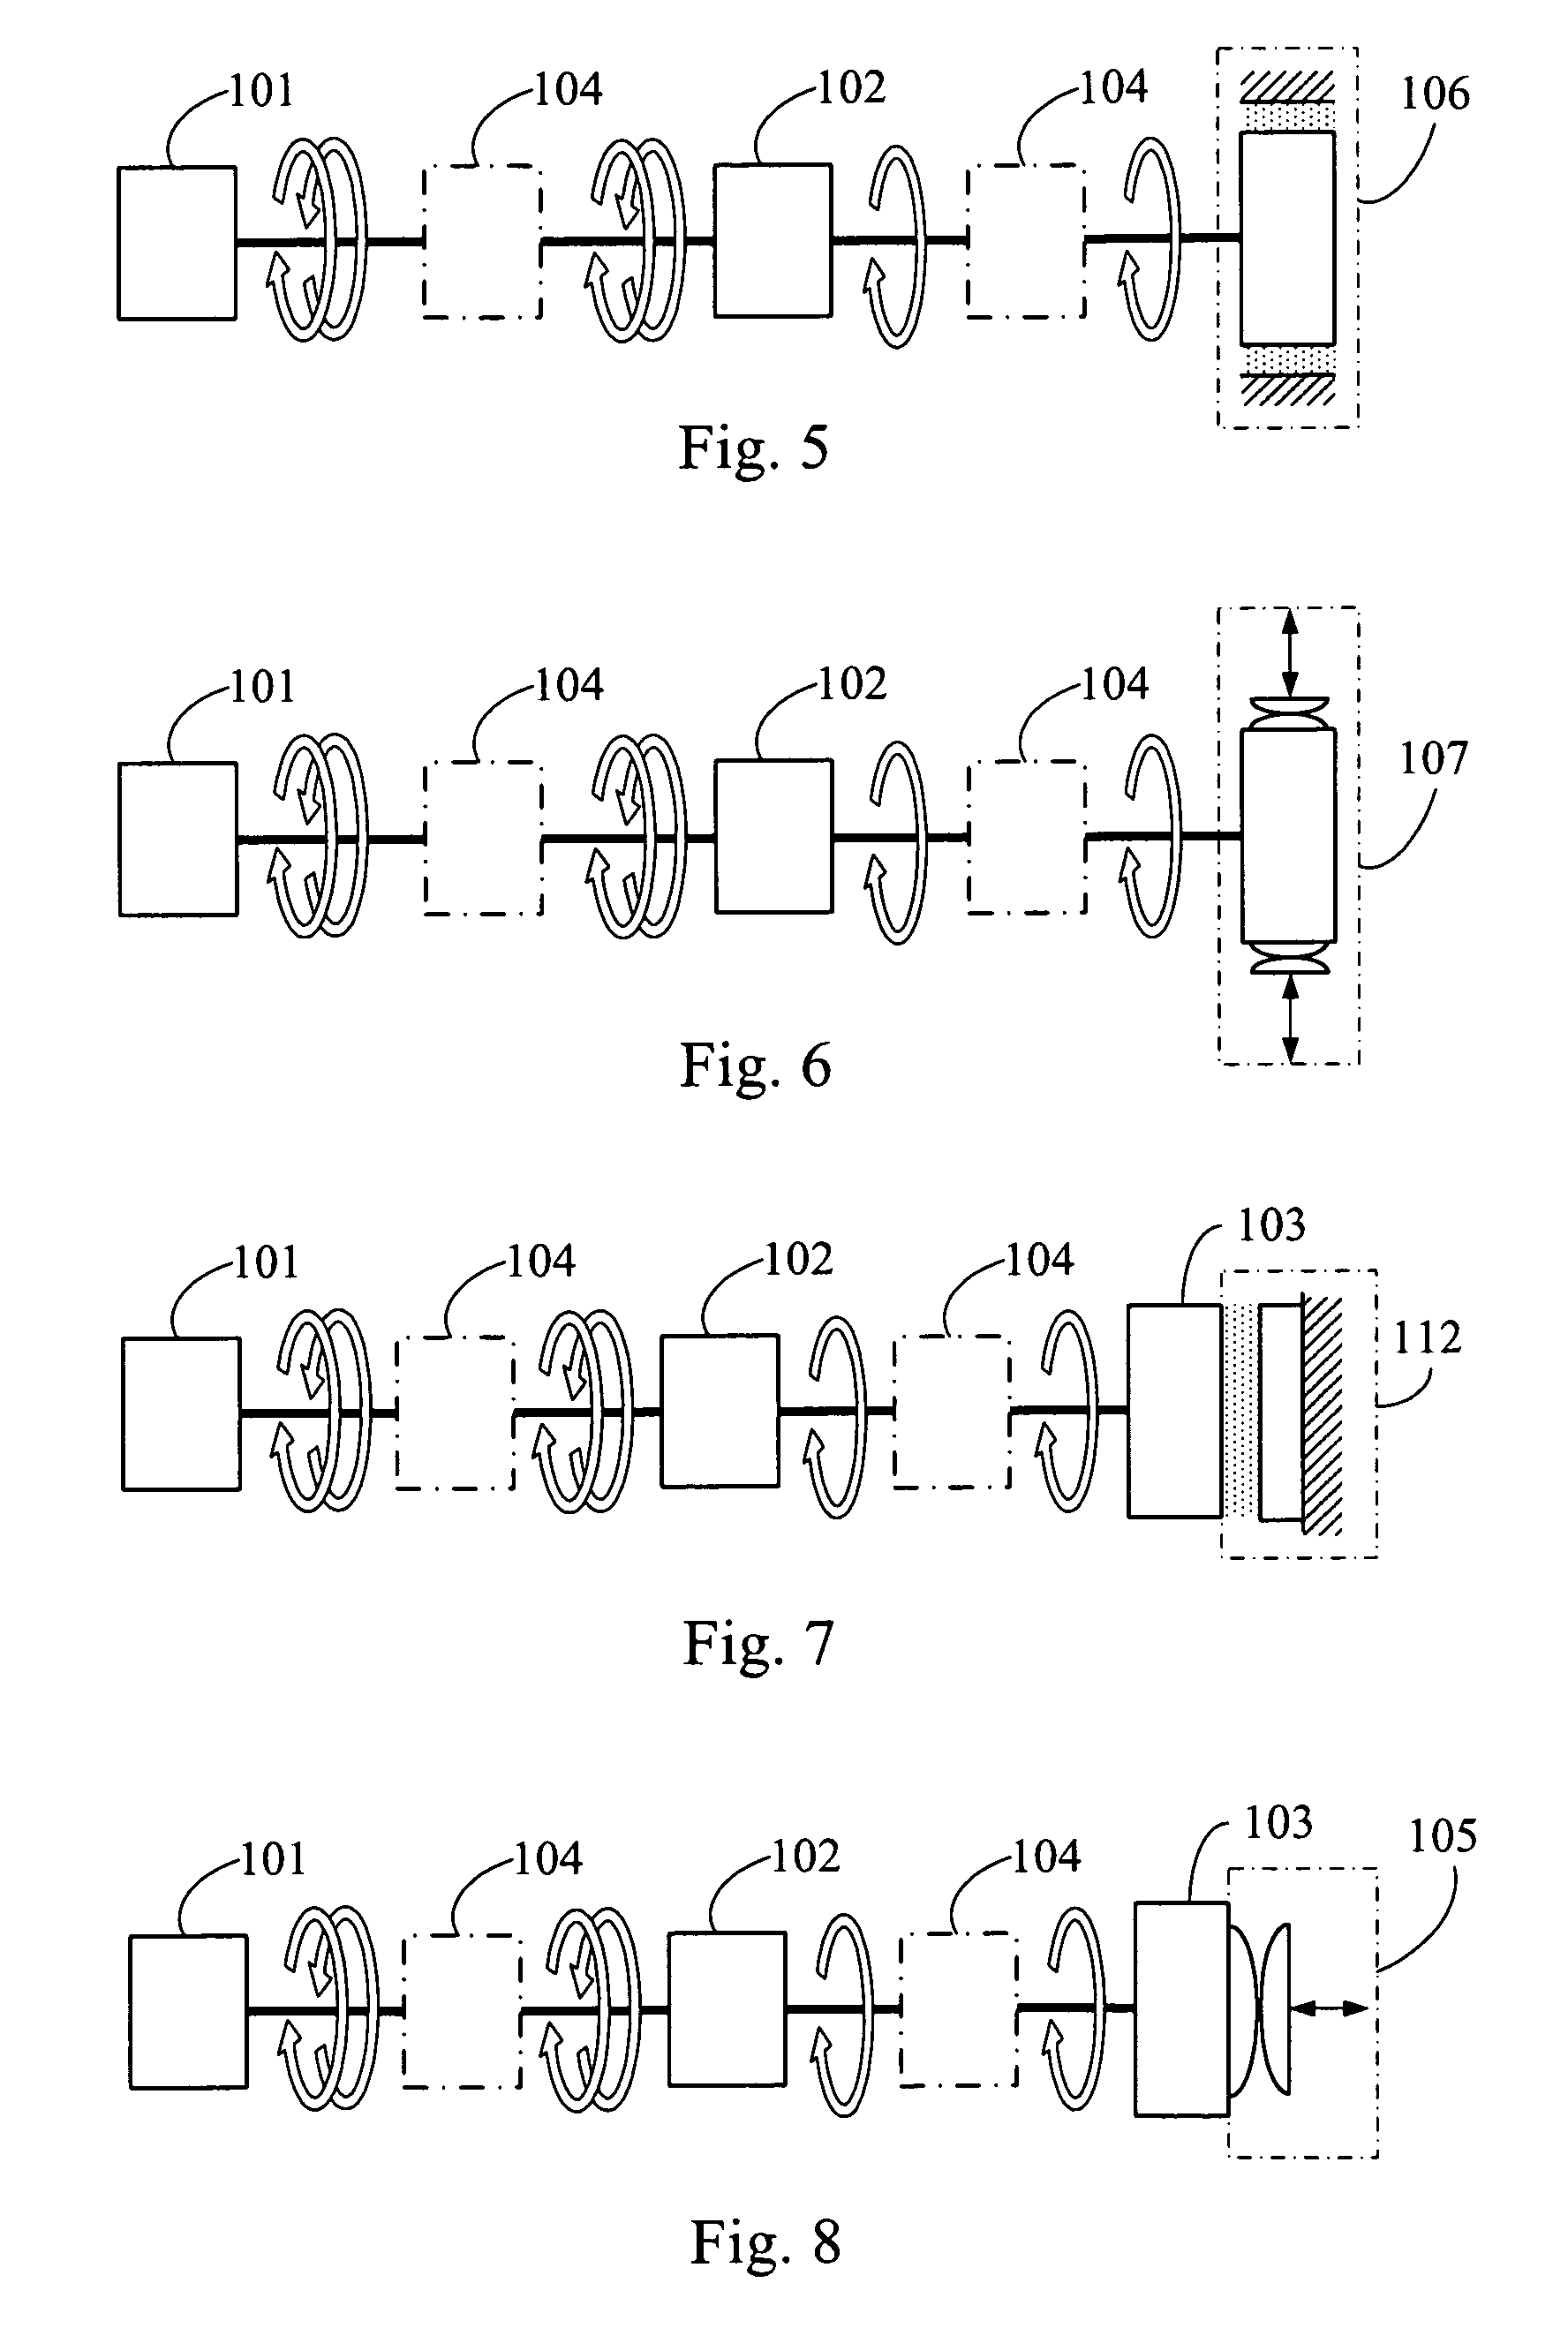 Manpower-driven device with bi-directional input and constant directional rotation output